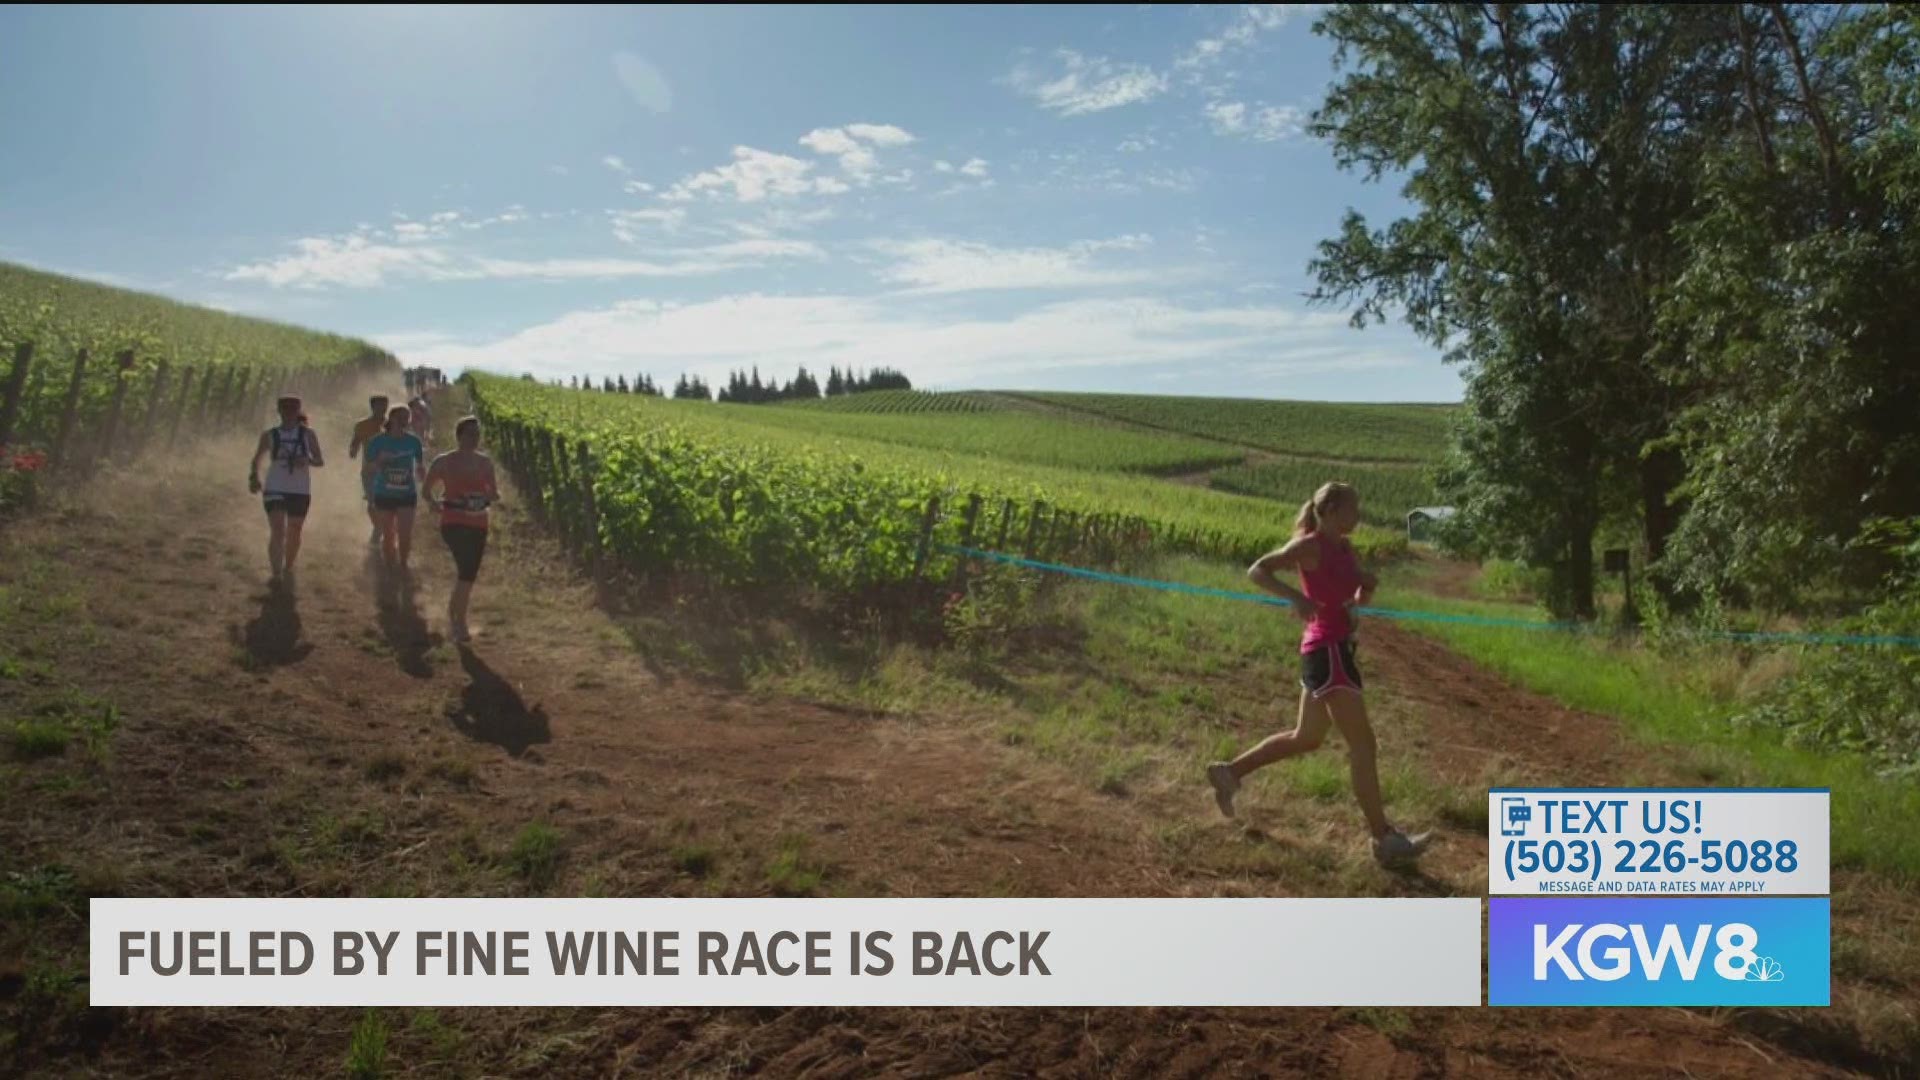 'Fueled by Fine Wine' half and quarter marathon takes place July 18. The race takes runners through private vineyards in the Dundee Hills.